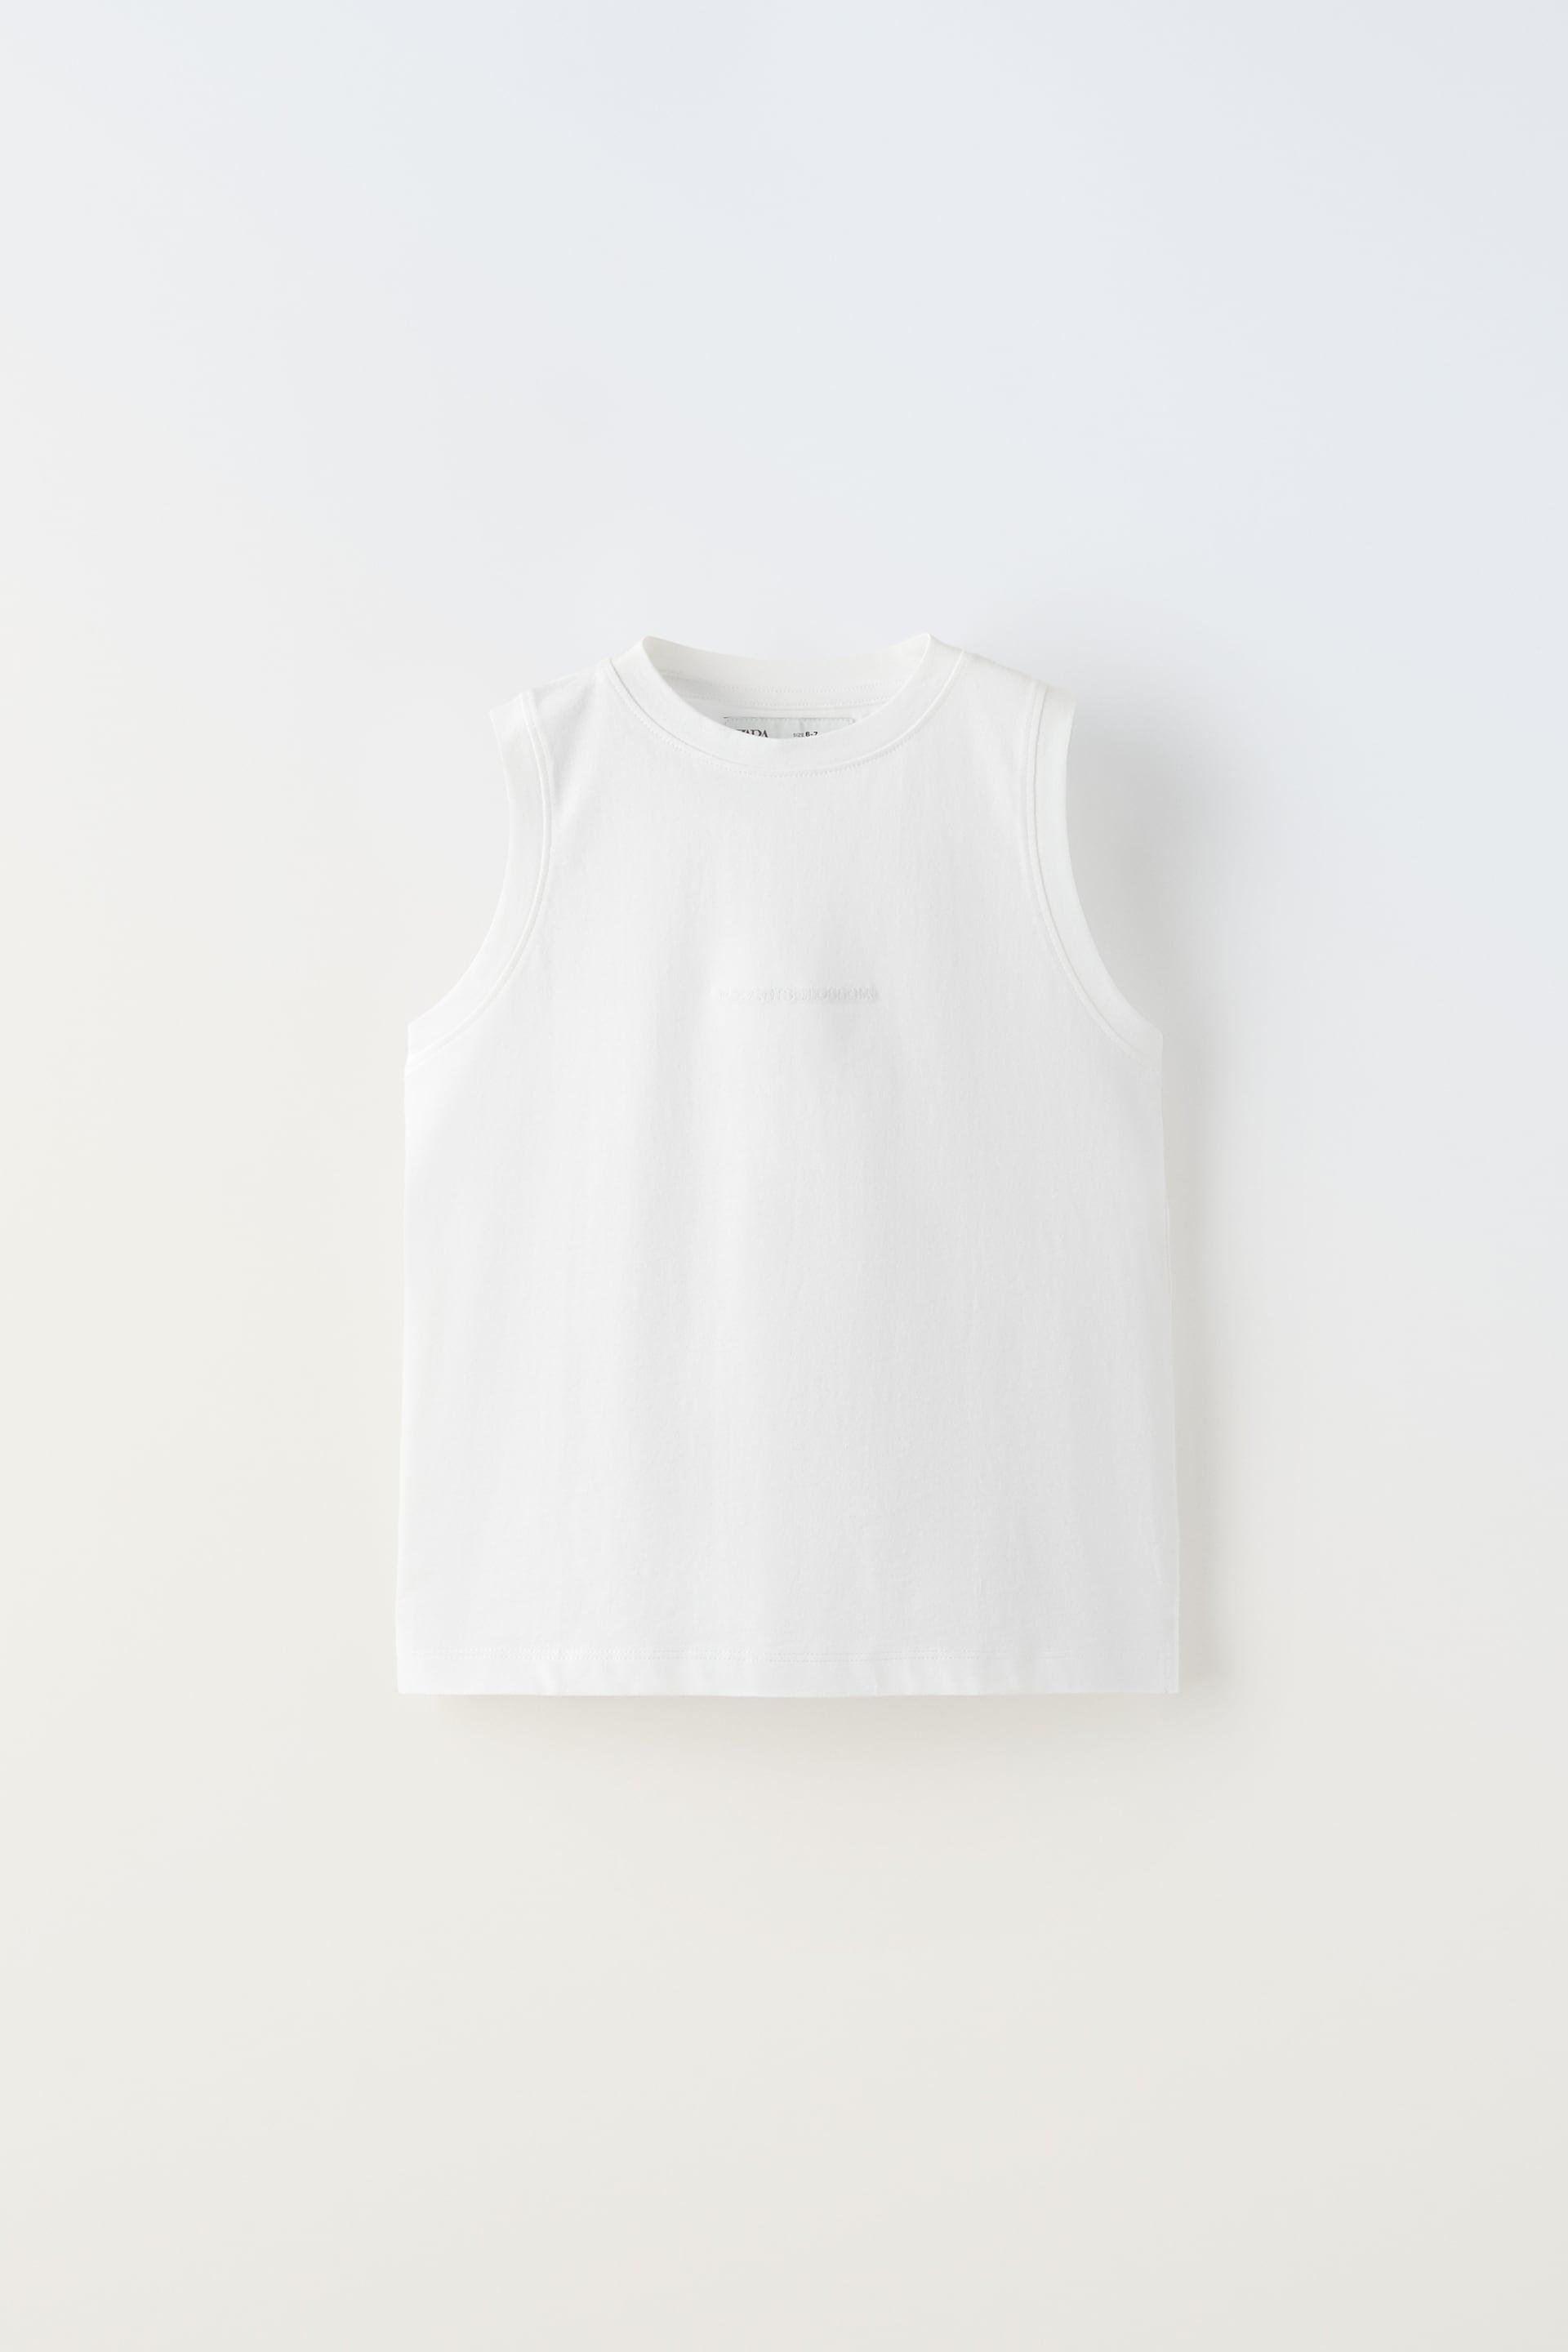 EMBROIDERED TEXT T-SHIRT by ZARA